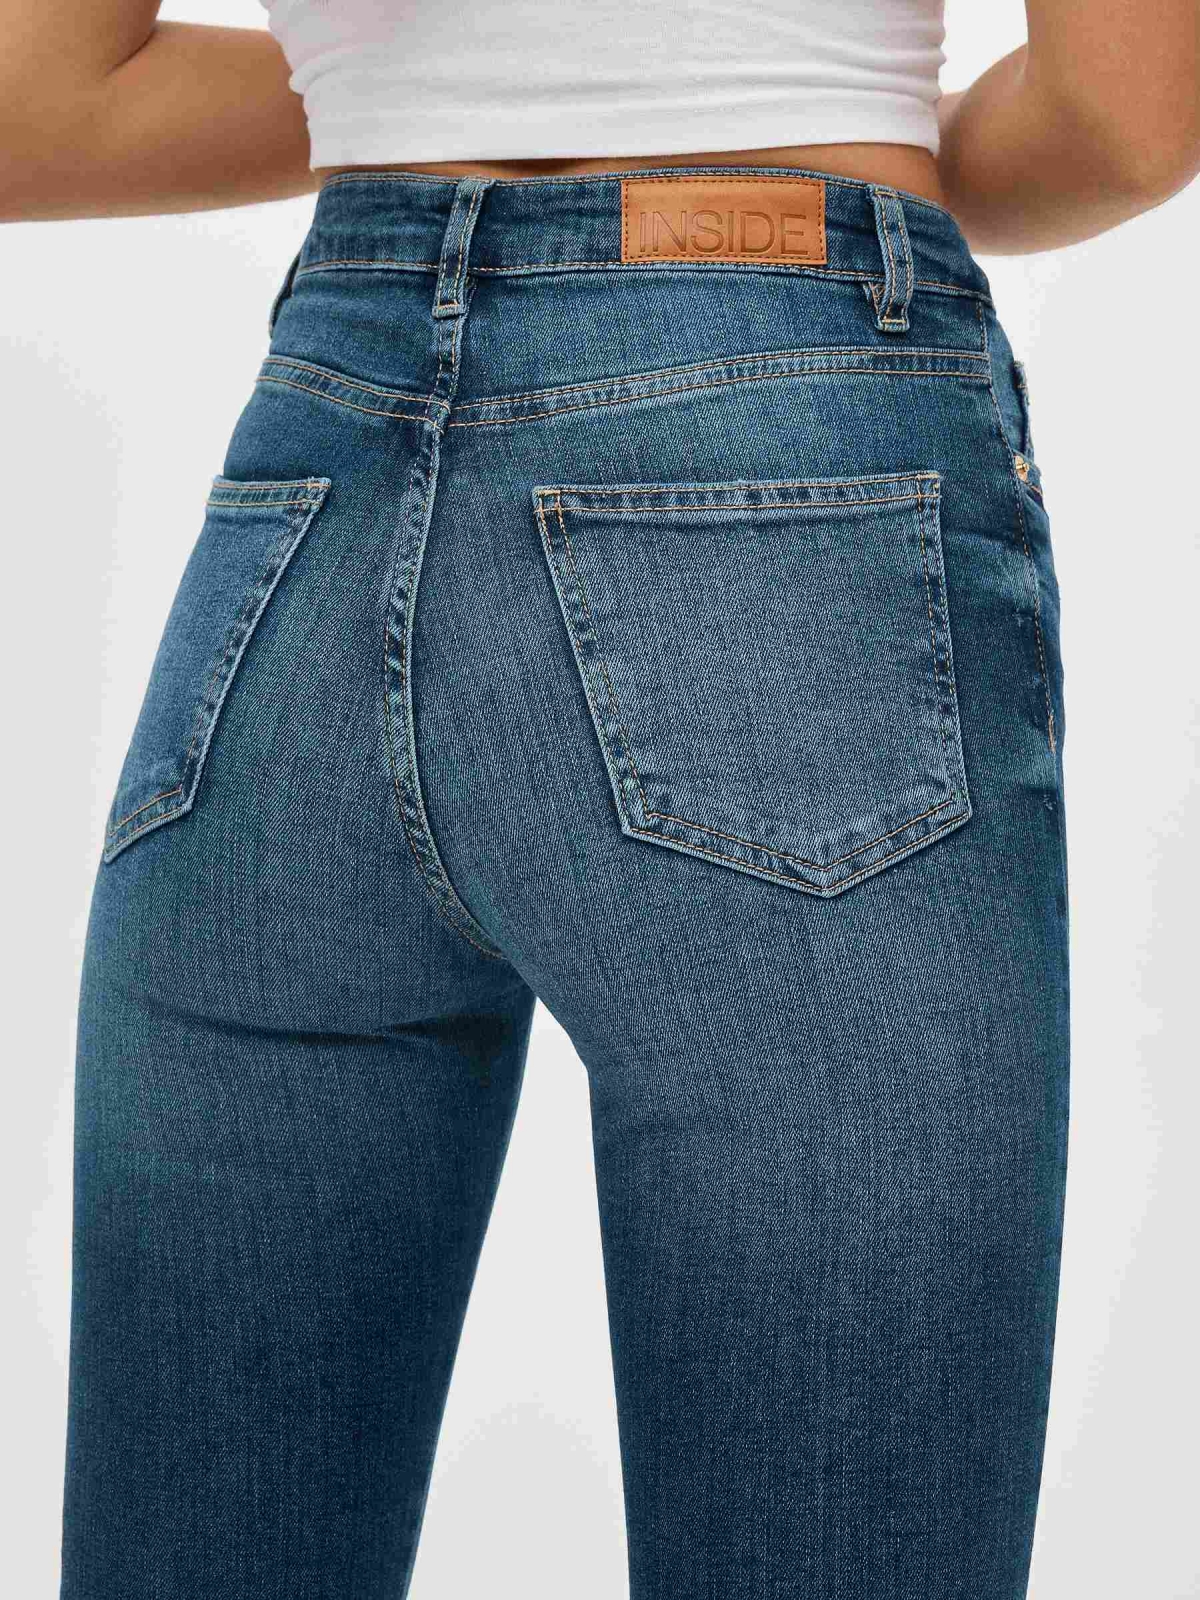 High rise skinny jeans blue detail view